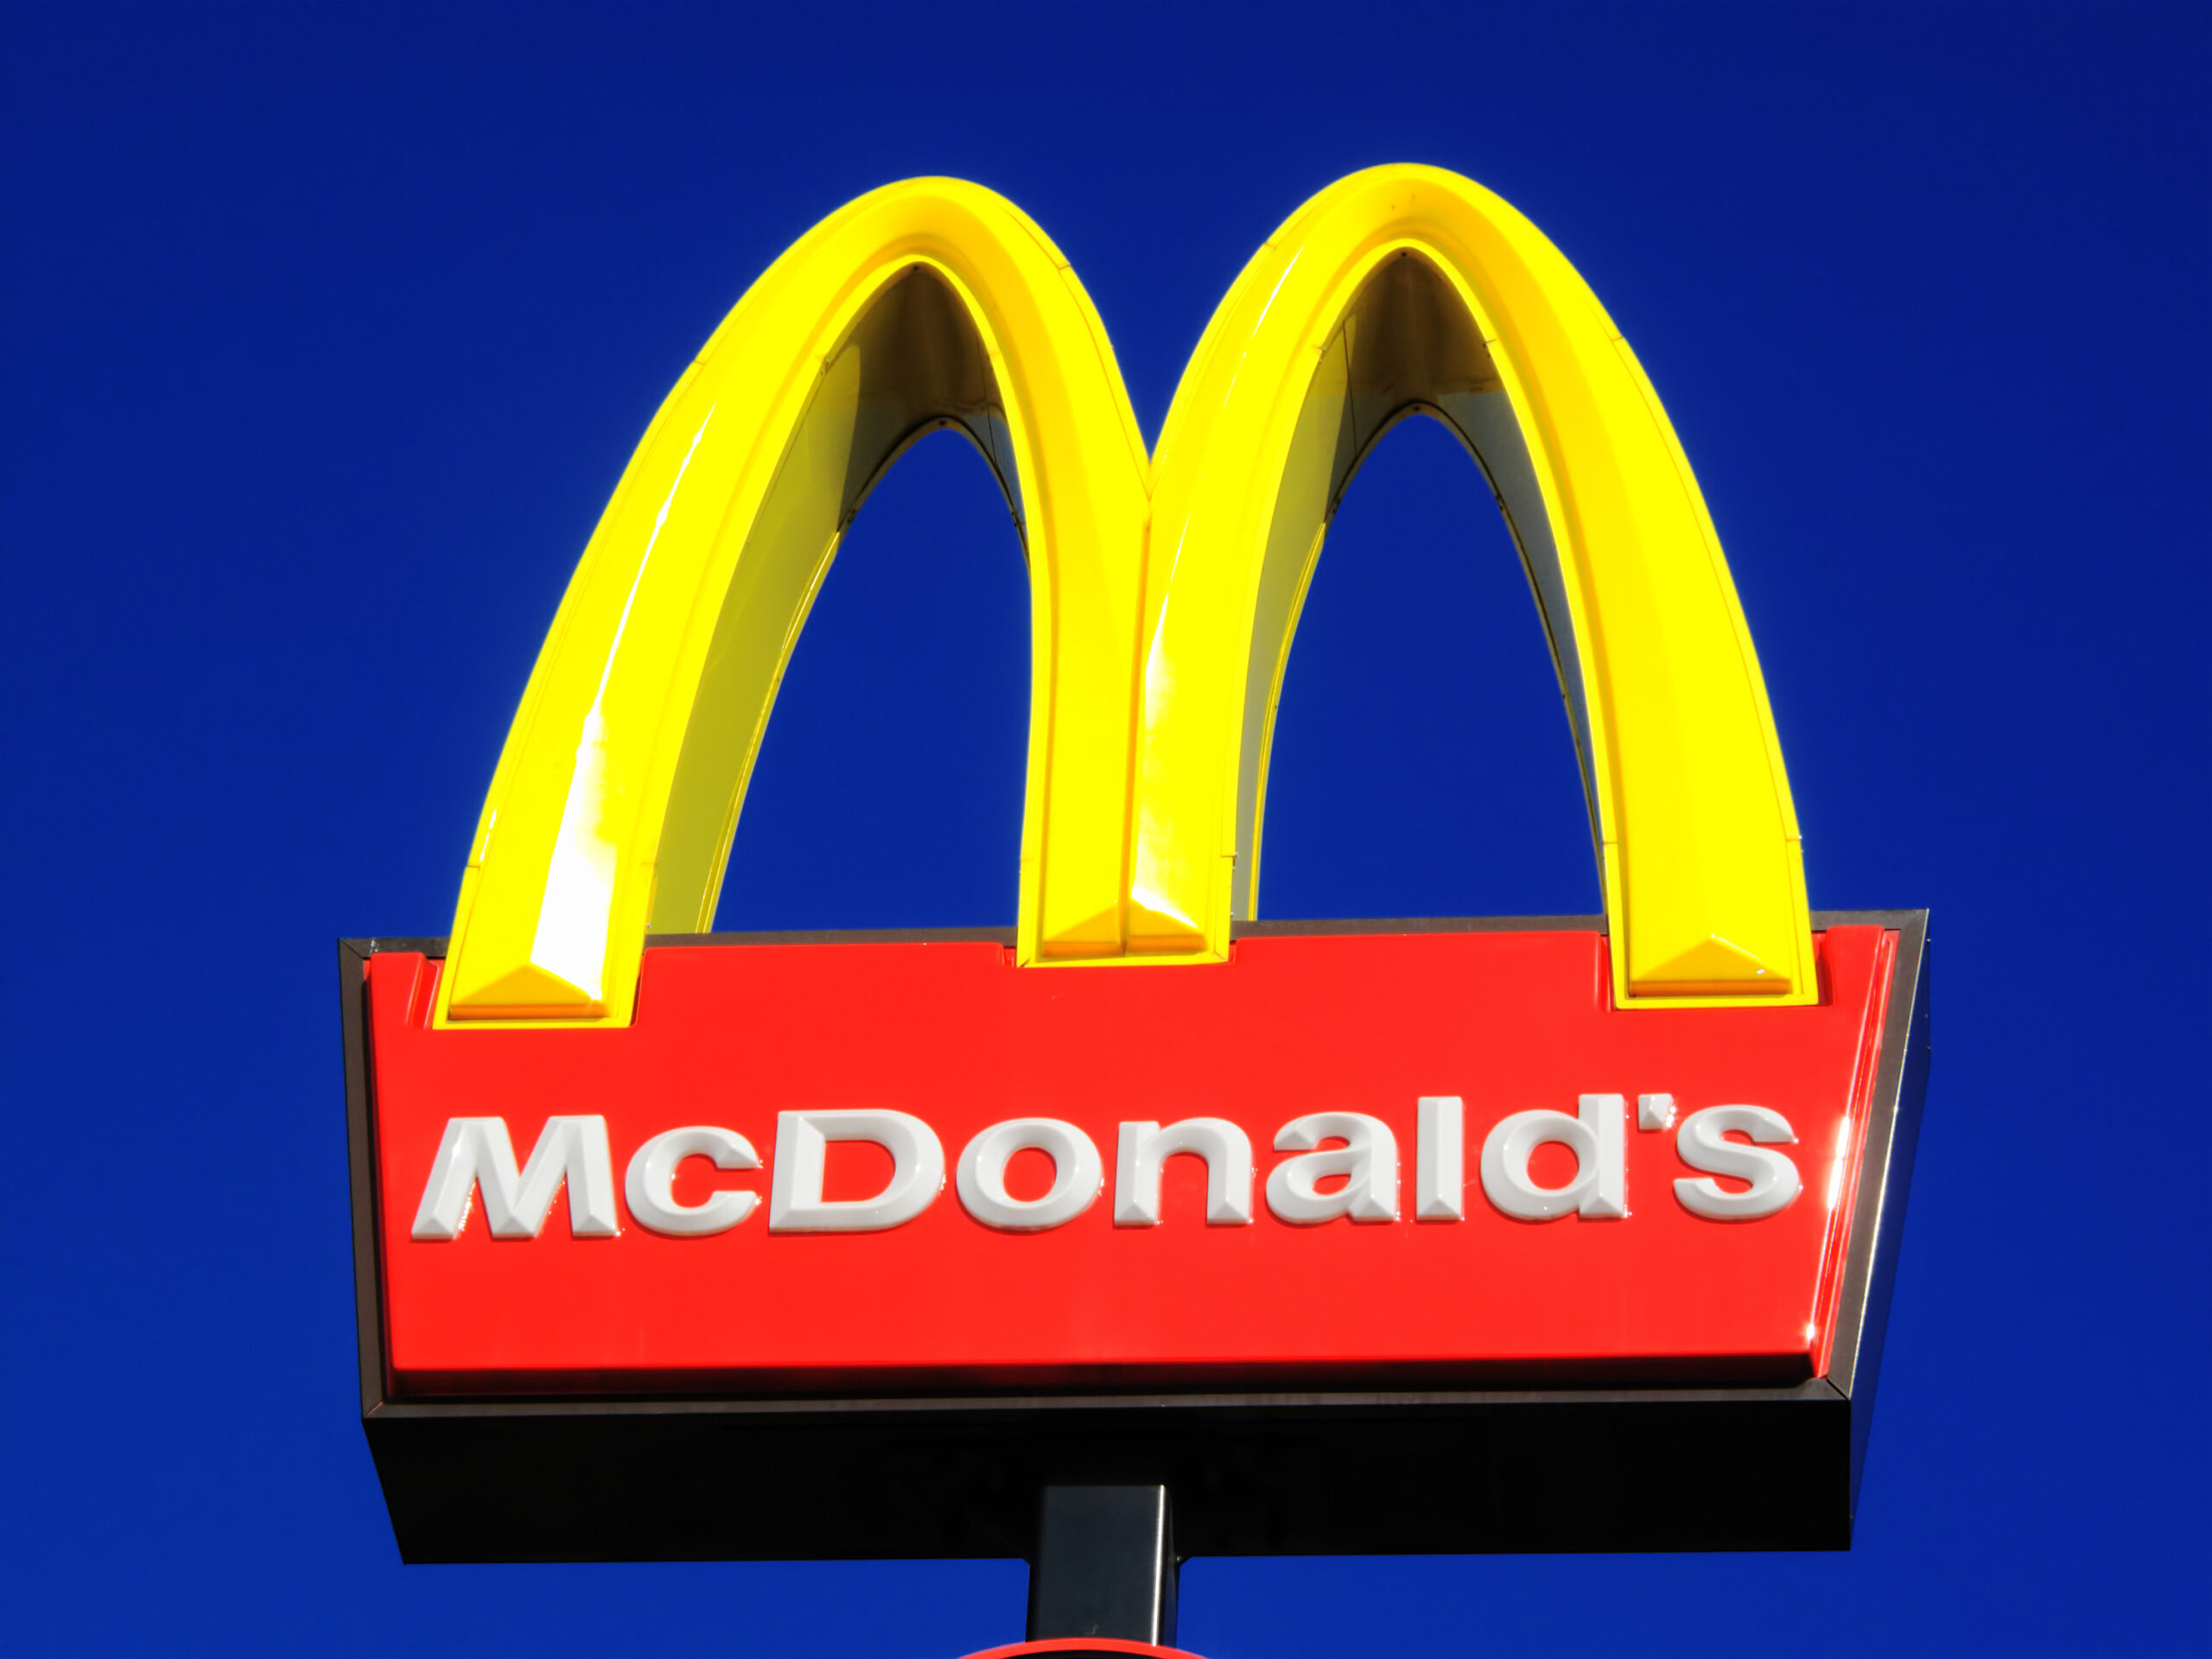 McDonald's measures PR by tying it to business goals